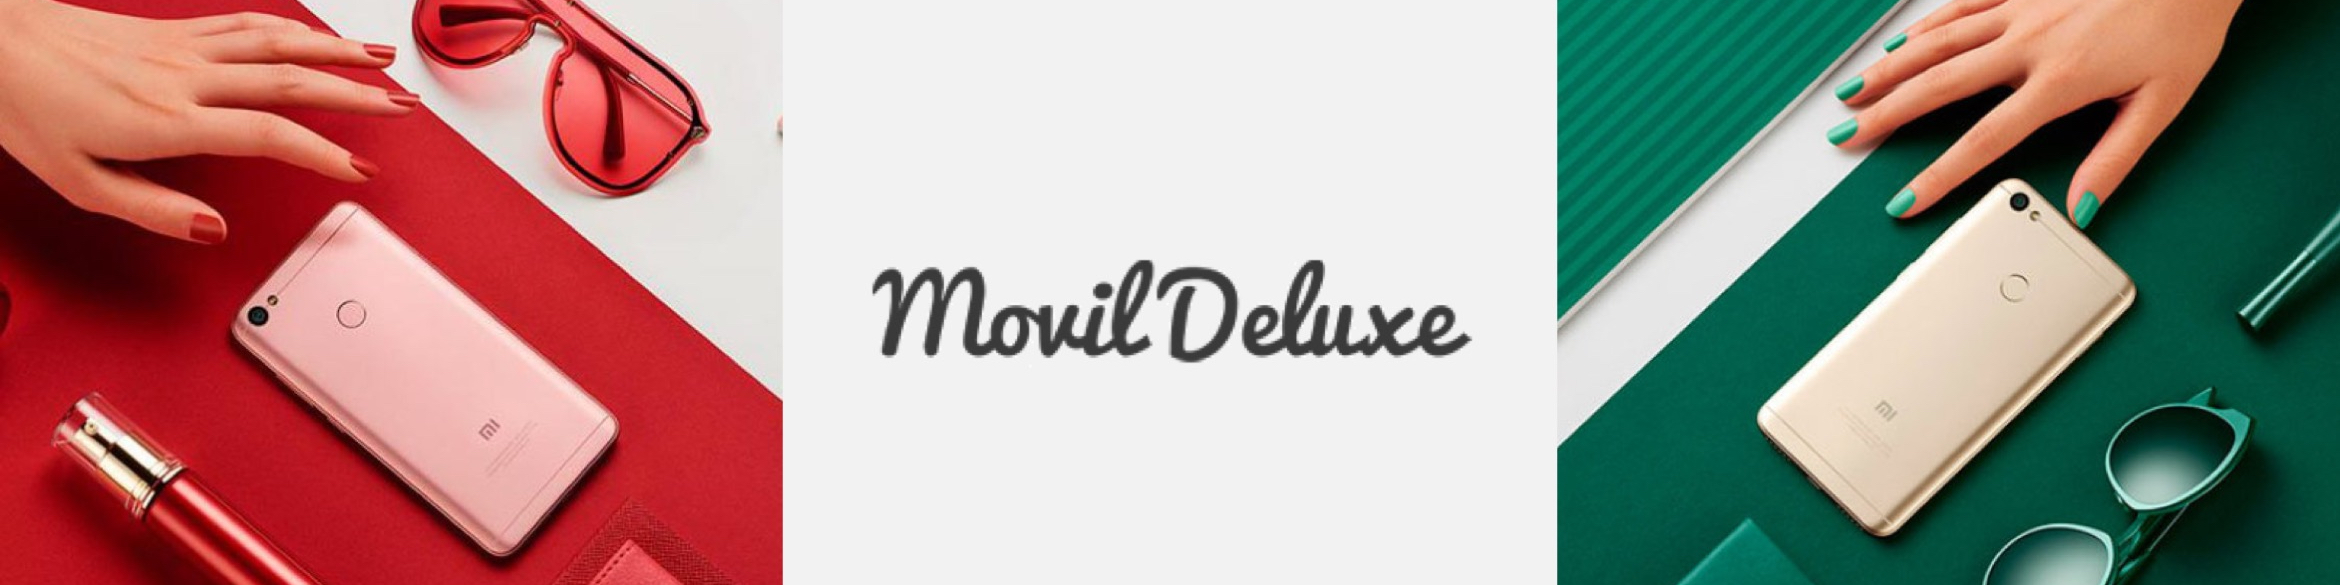 MovilDeluxe